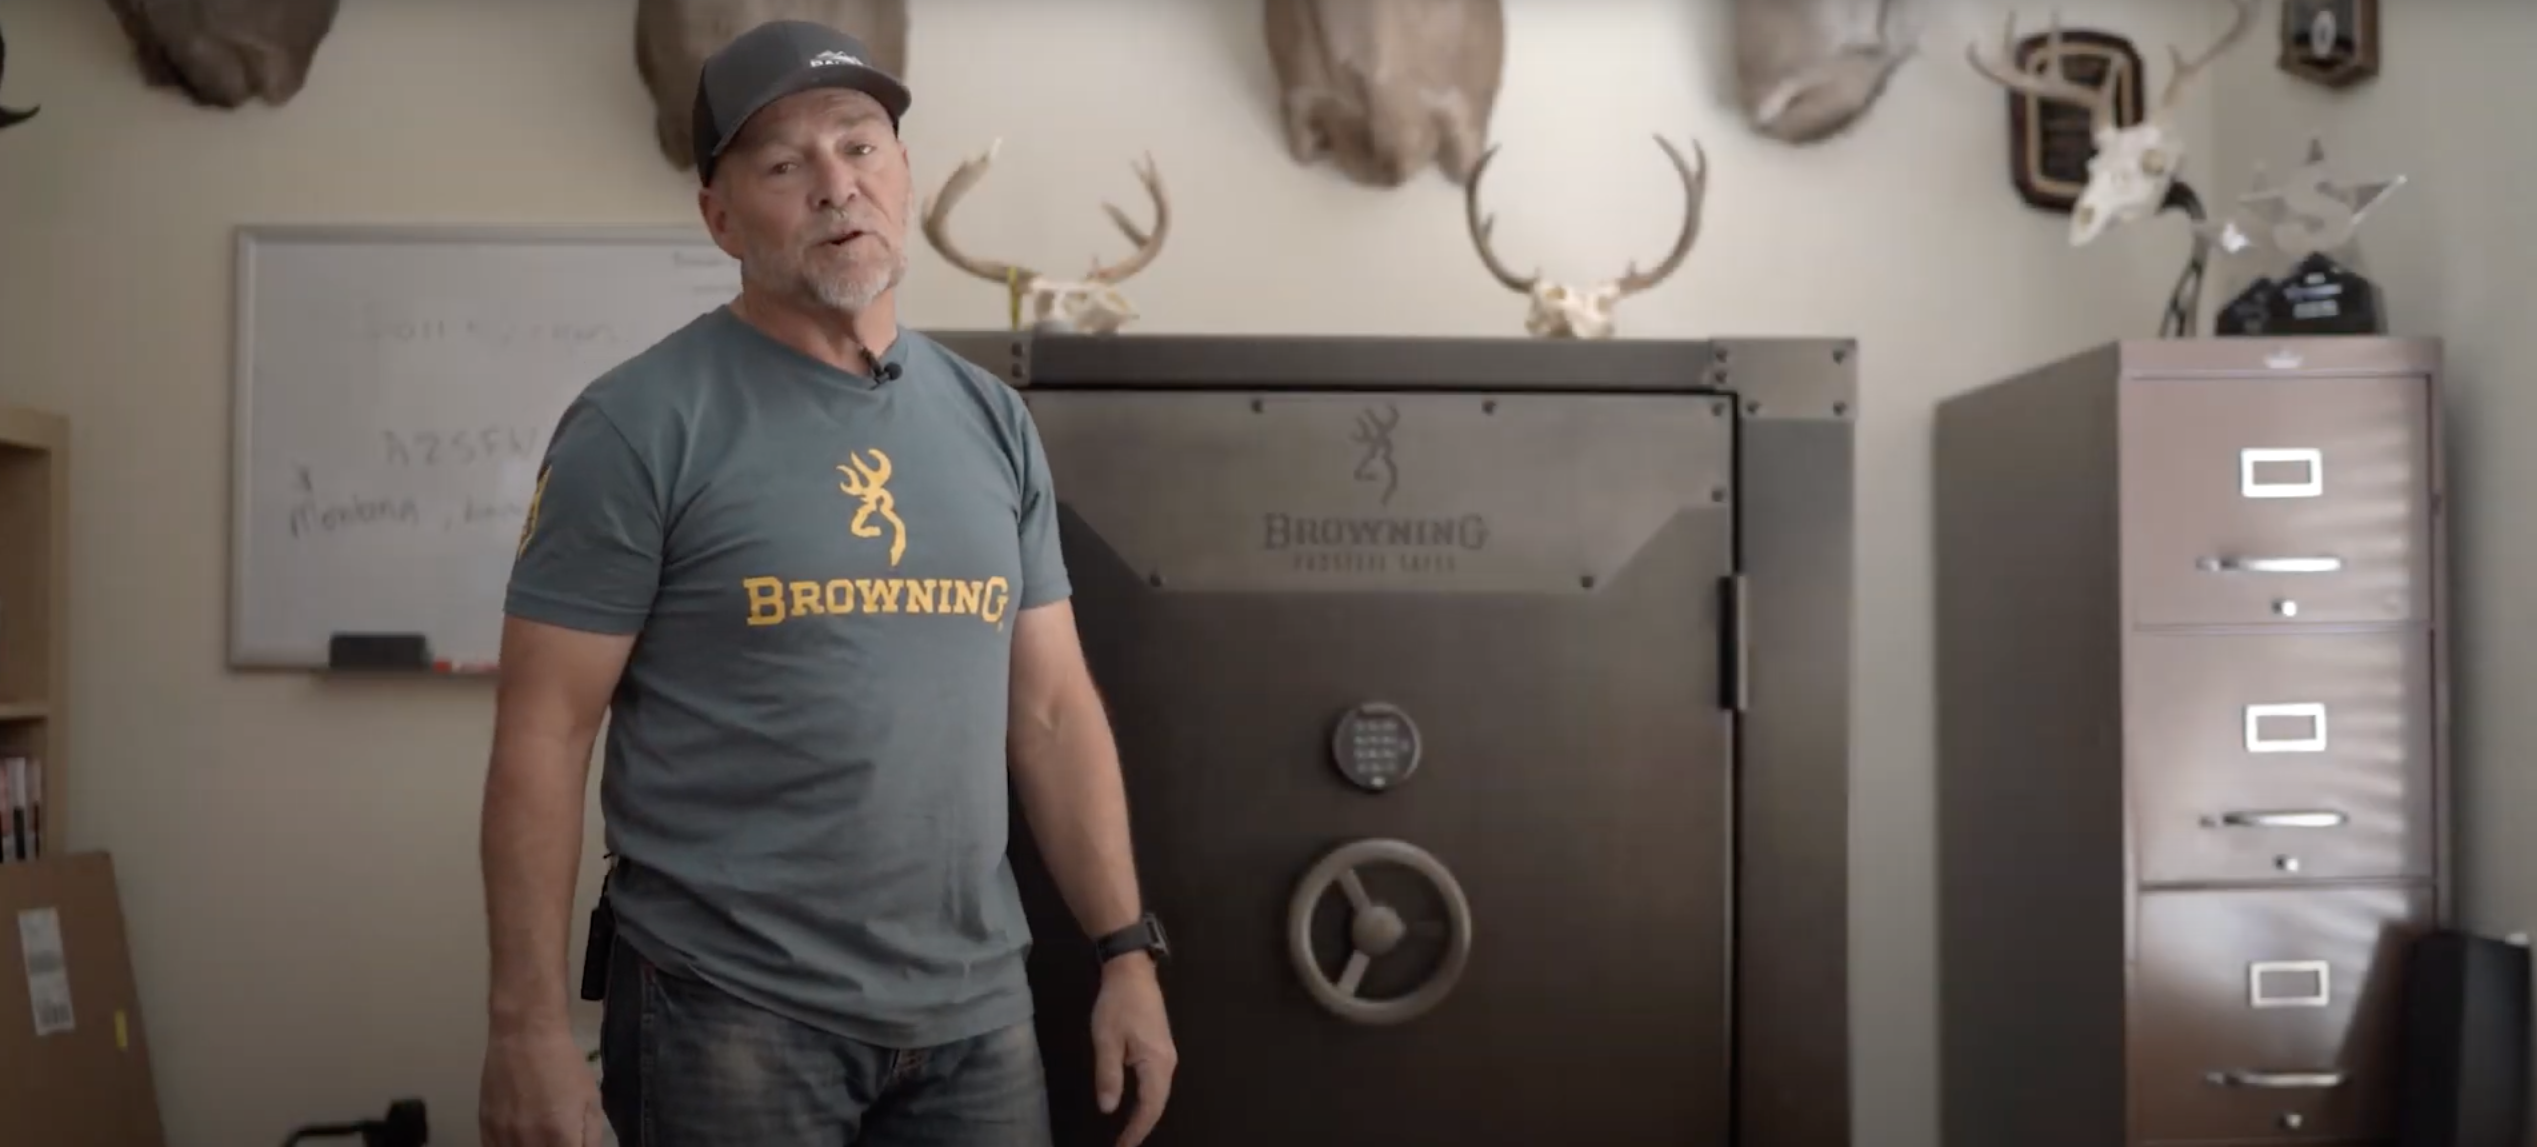 Browning Safe Overview